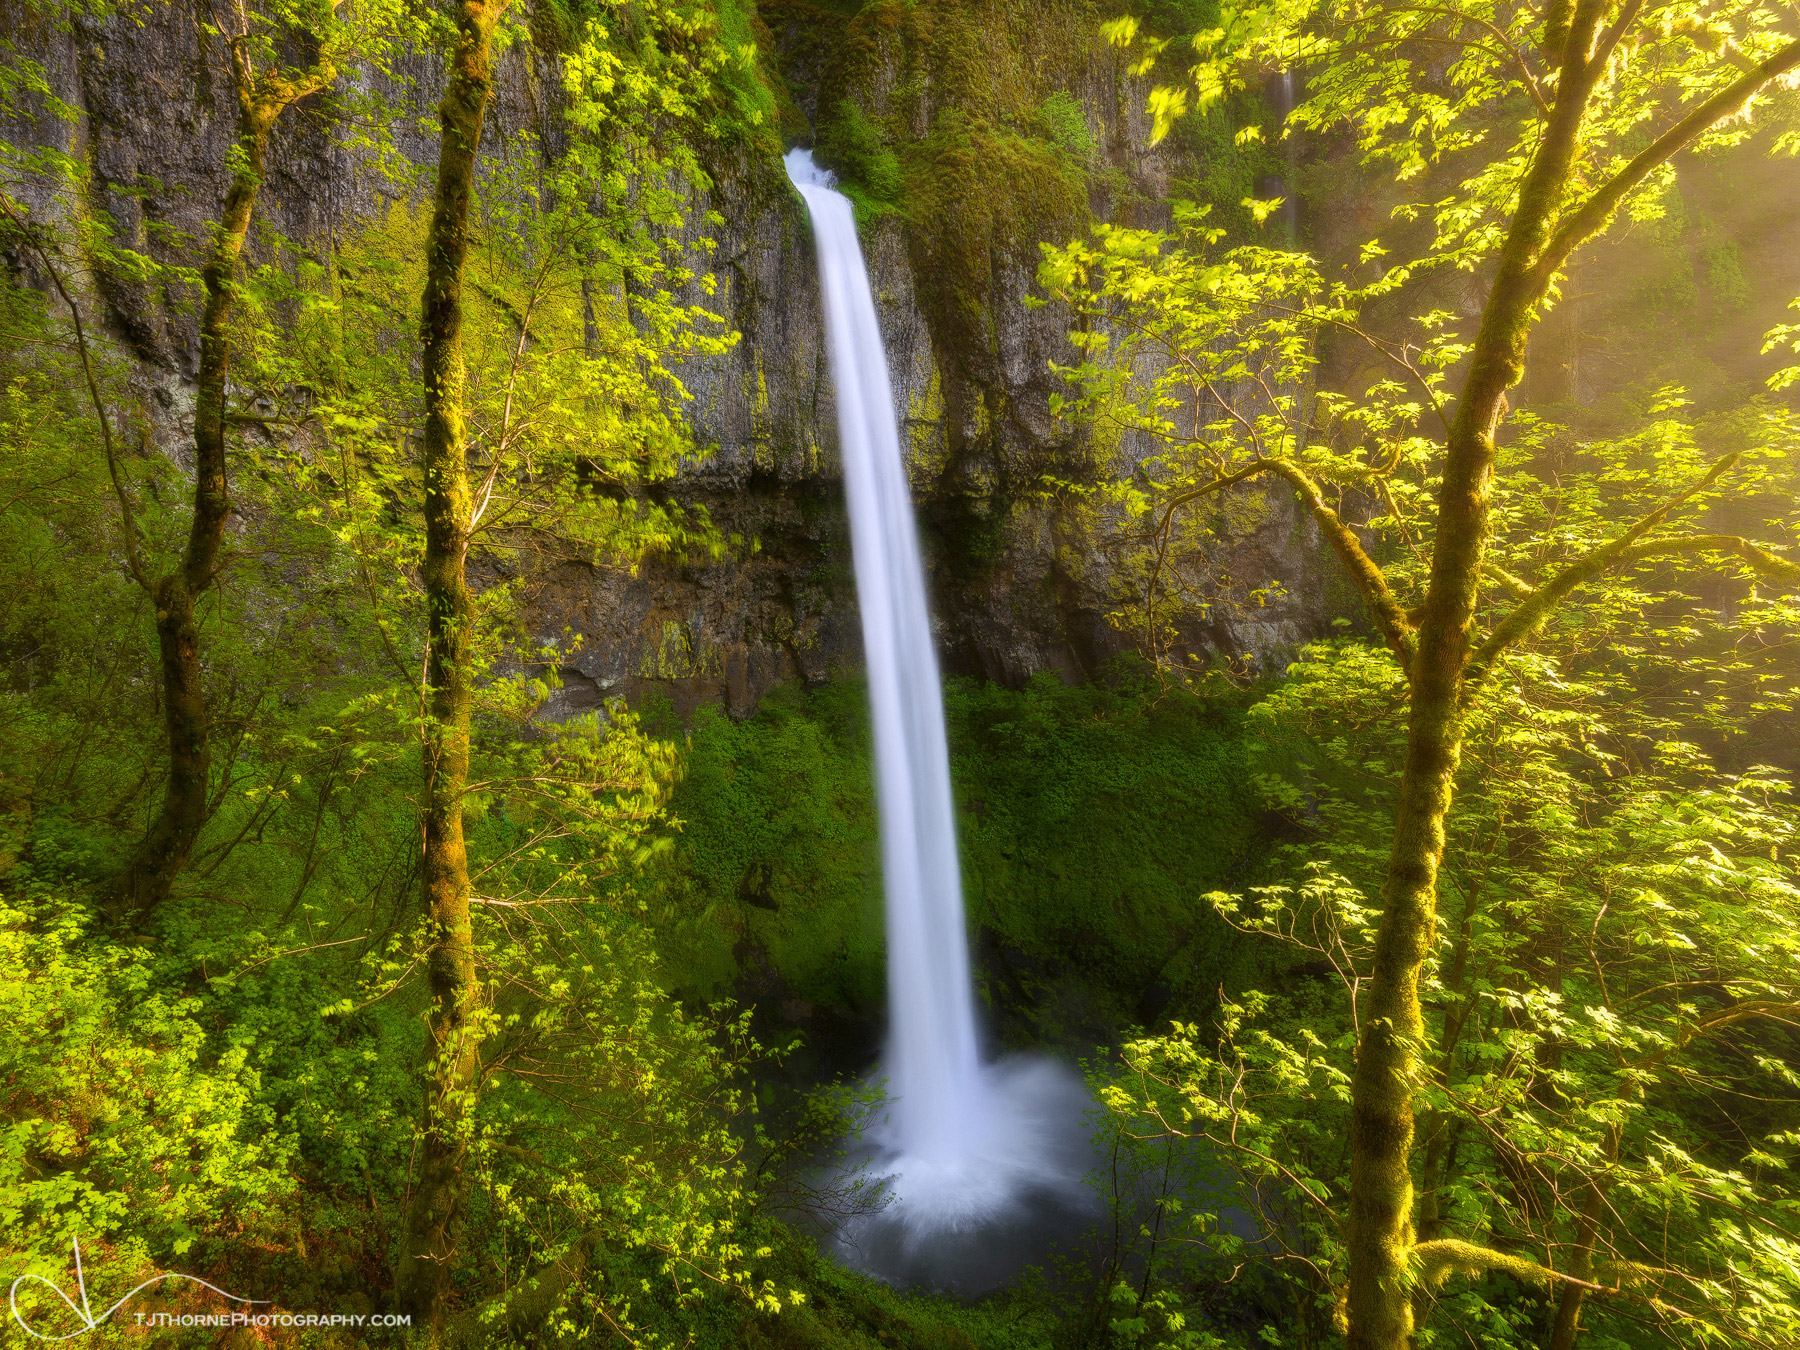 FINE ART LIMITED EDITION OF 100 Golden light falls across the scene at Elowah Falls in the Columbia River Gorge, Oregon. I dedicate...